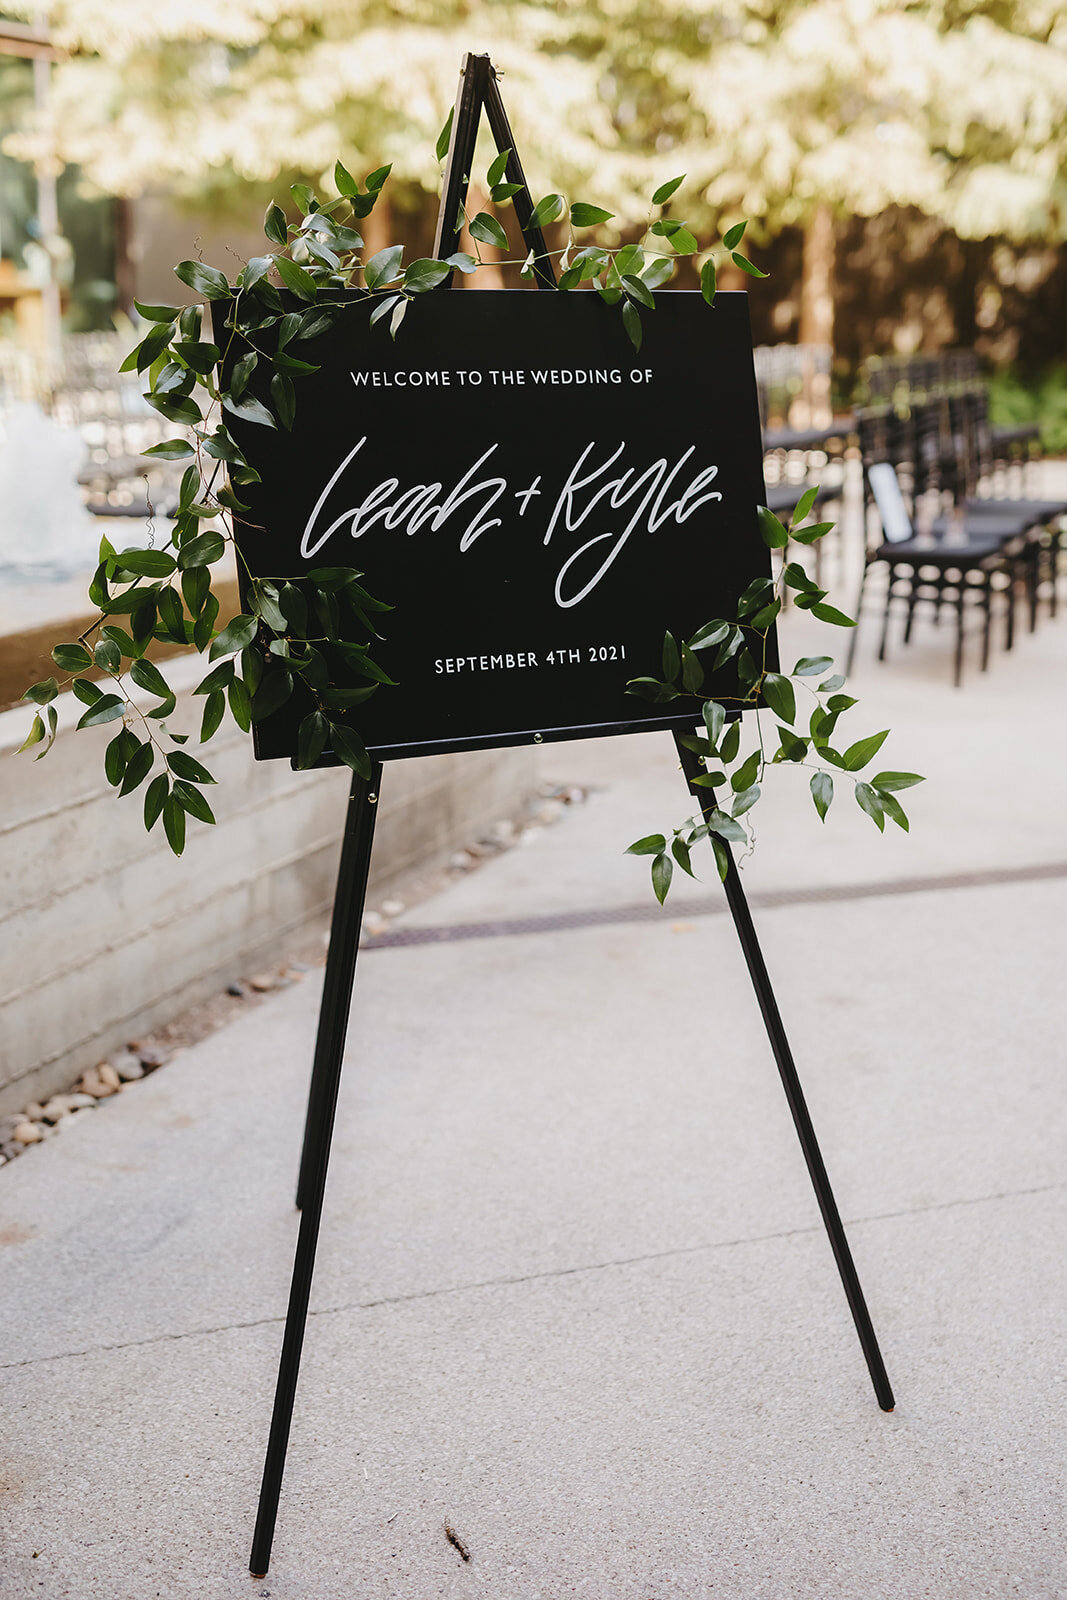 LBV Design House Wedding Design Planning Day-Of Signage Paper Goods Shoppable Accessories Wedding Day Austin, Texas beyond Valerie Strenk Lettered by Valerie Hand Lettering13